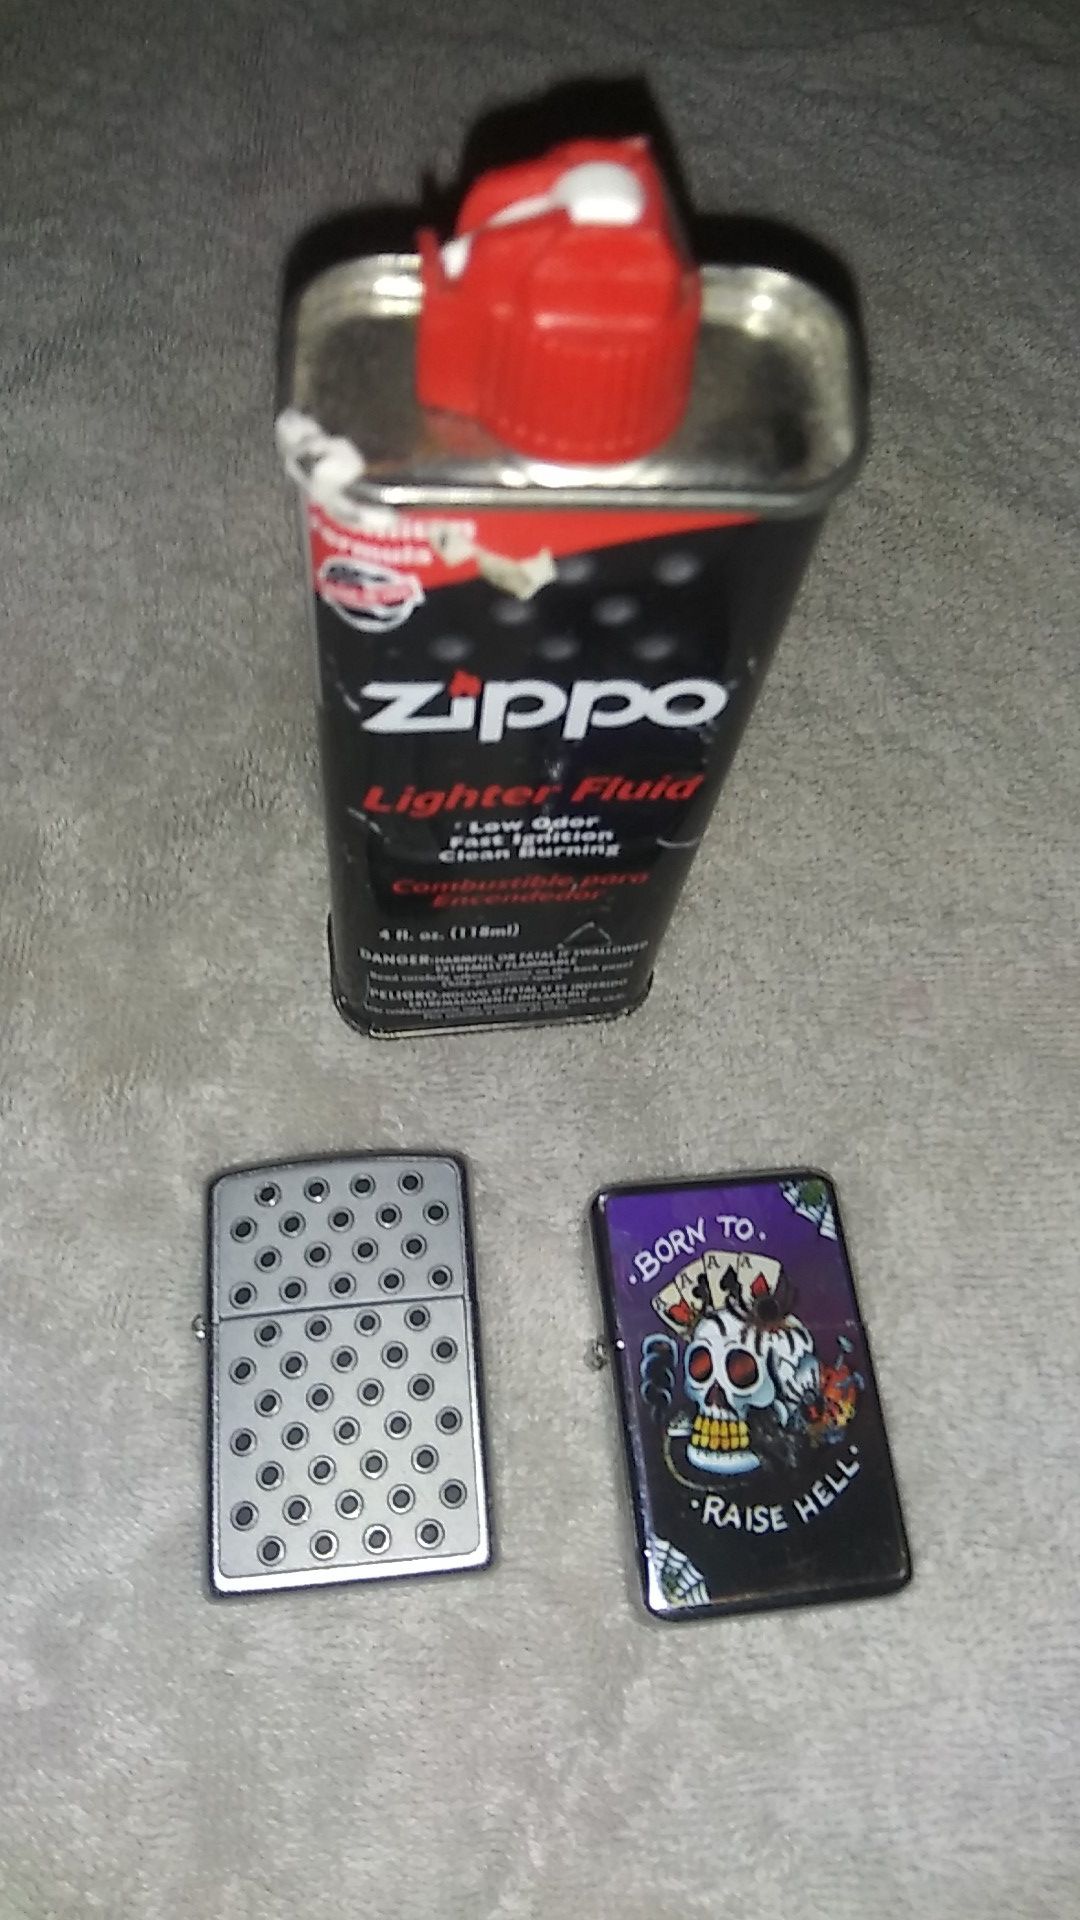 Two zippo lighters and half can fluid